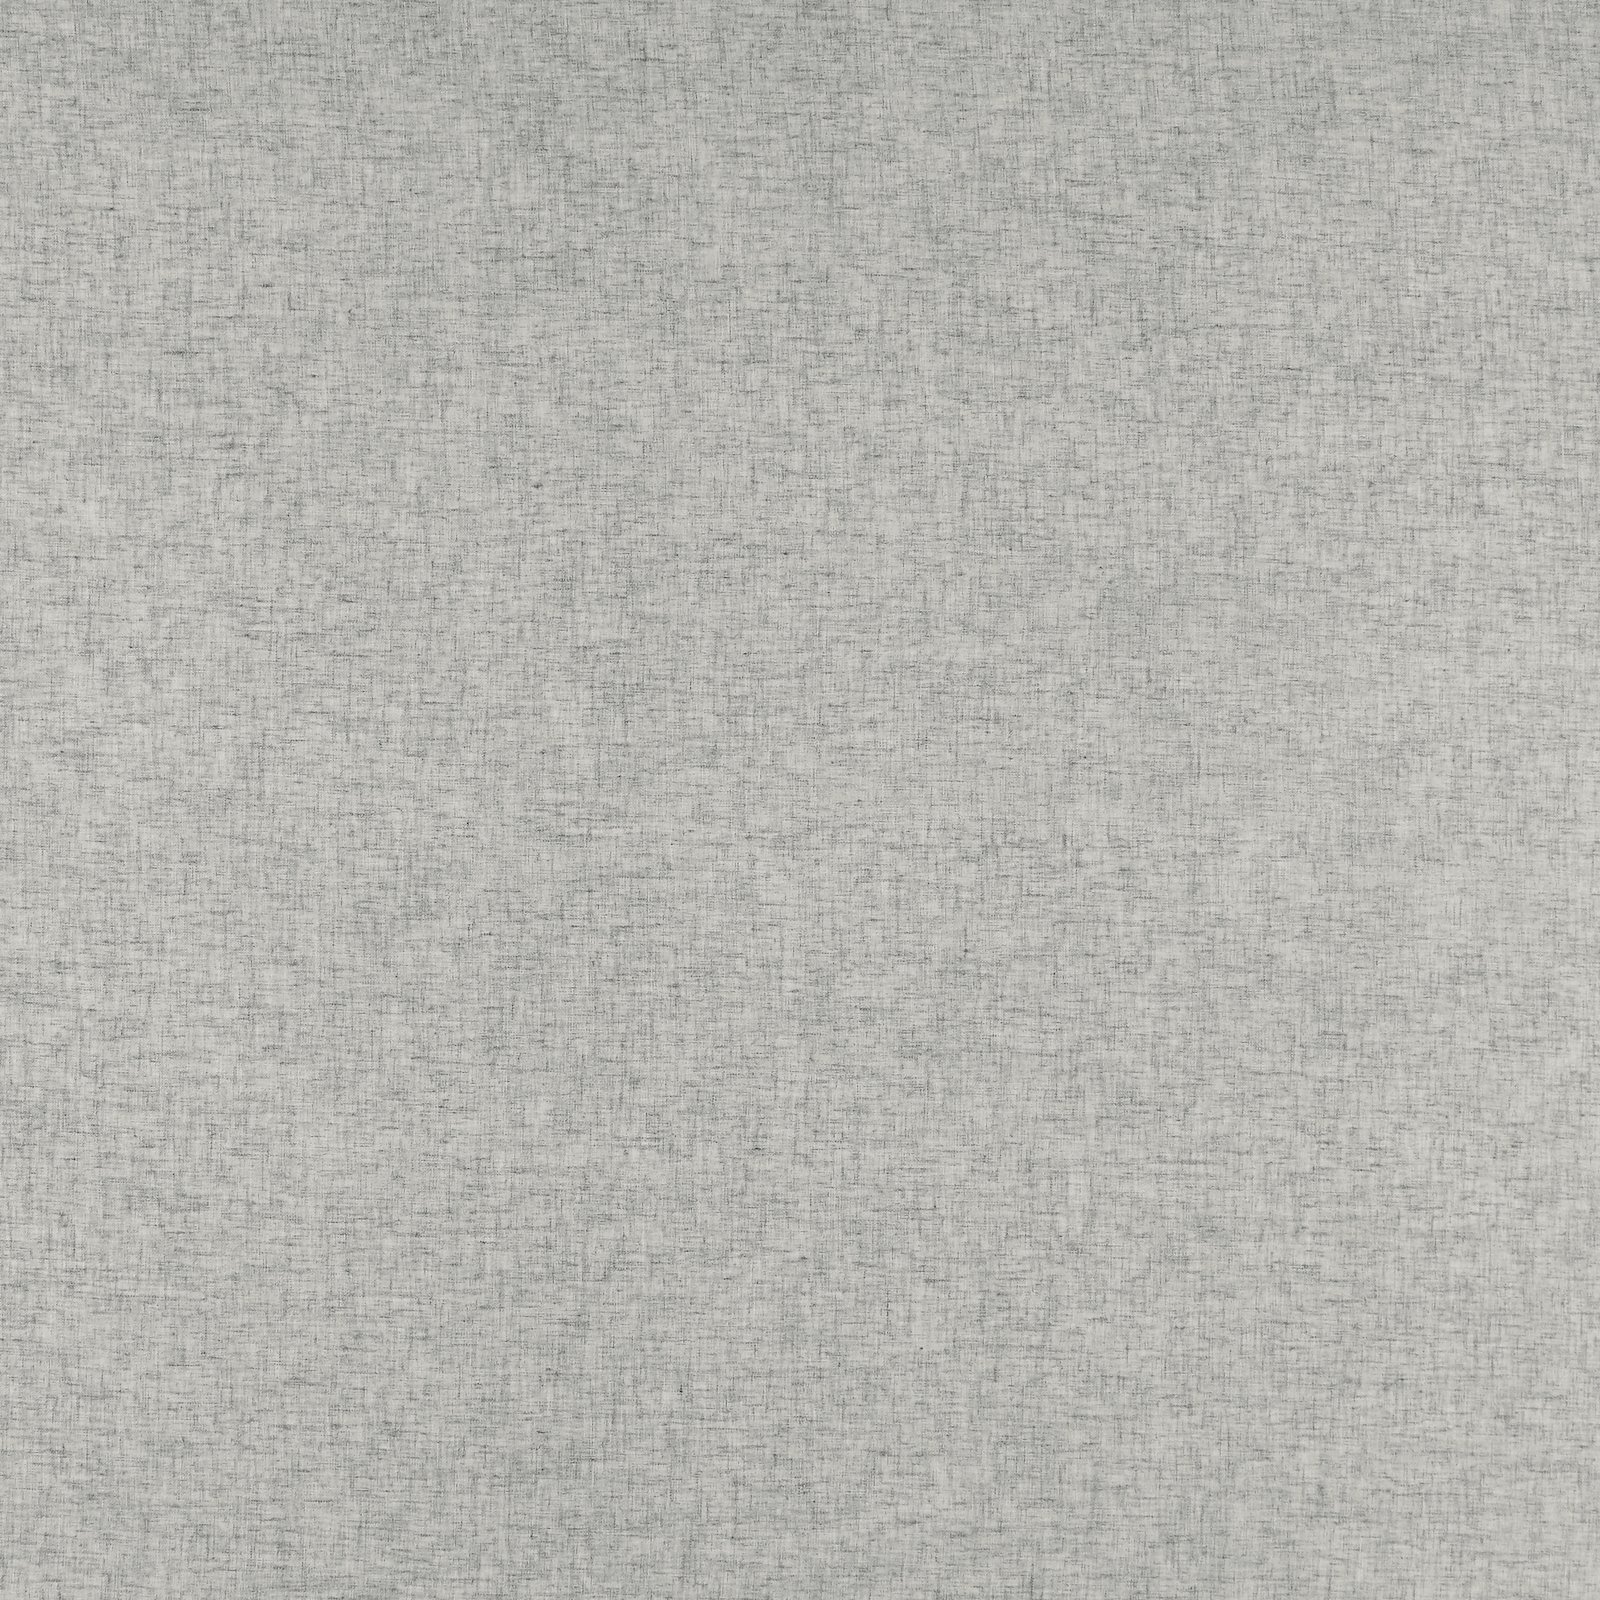 Voile grey polyester/linen blend 835167_pack_solid